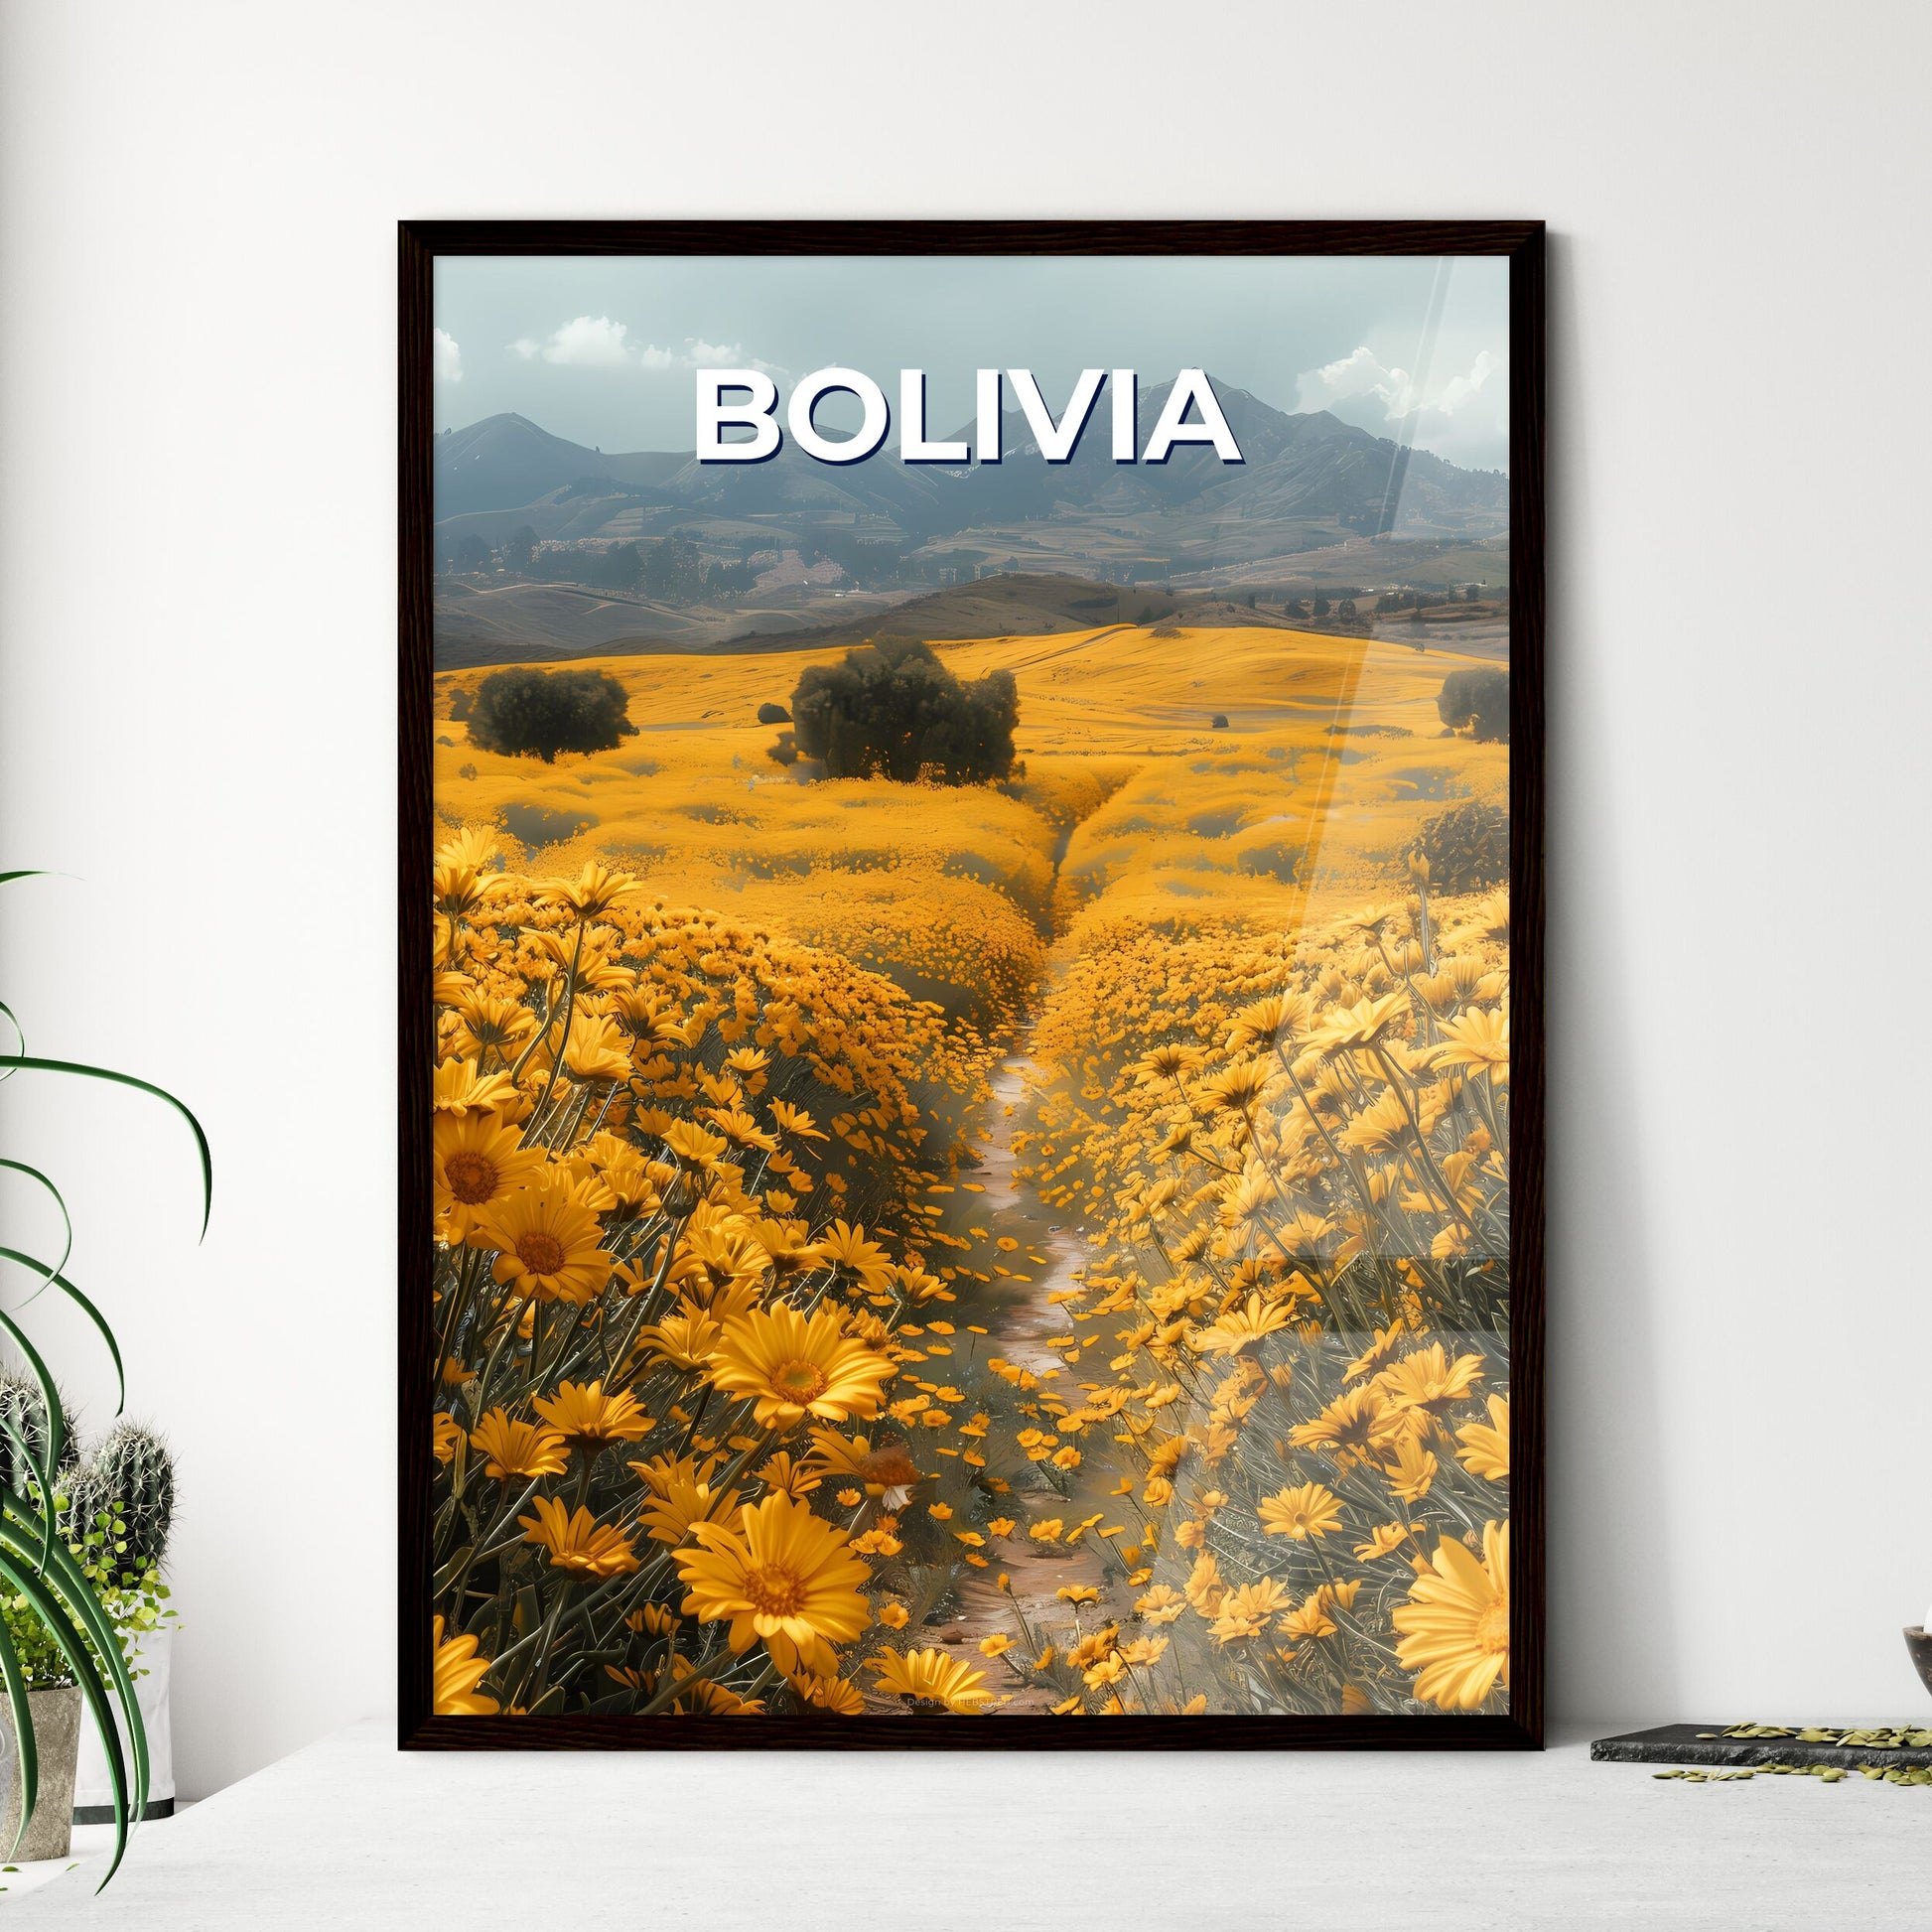 Vibrant Artistic Yellow Flower Field Painting, Bolivia, South America